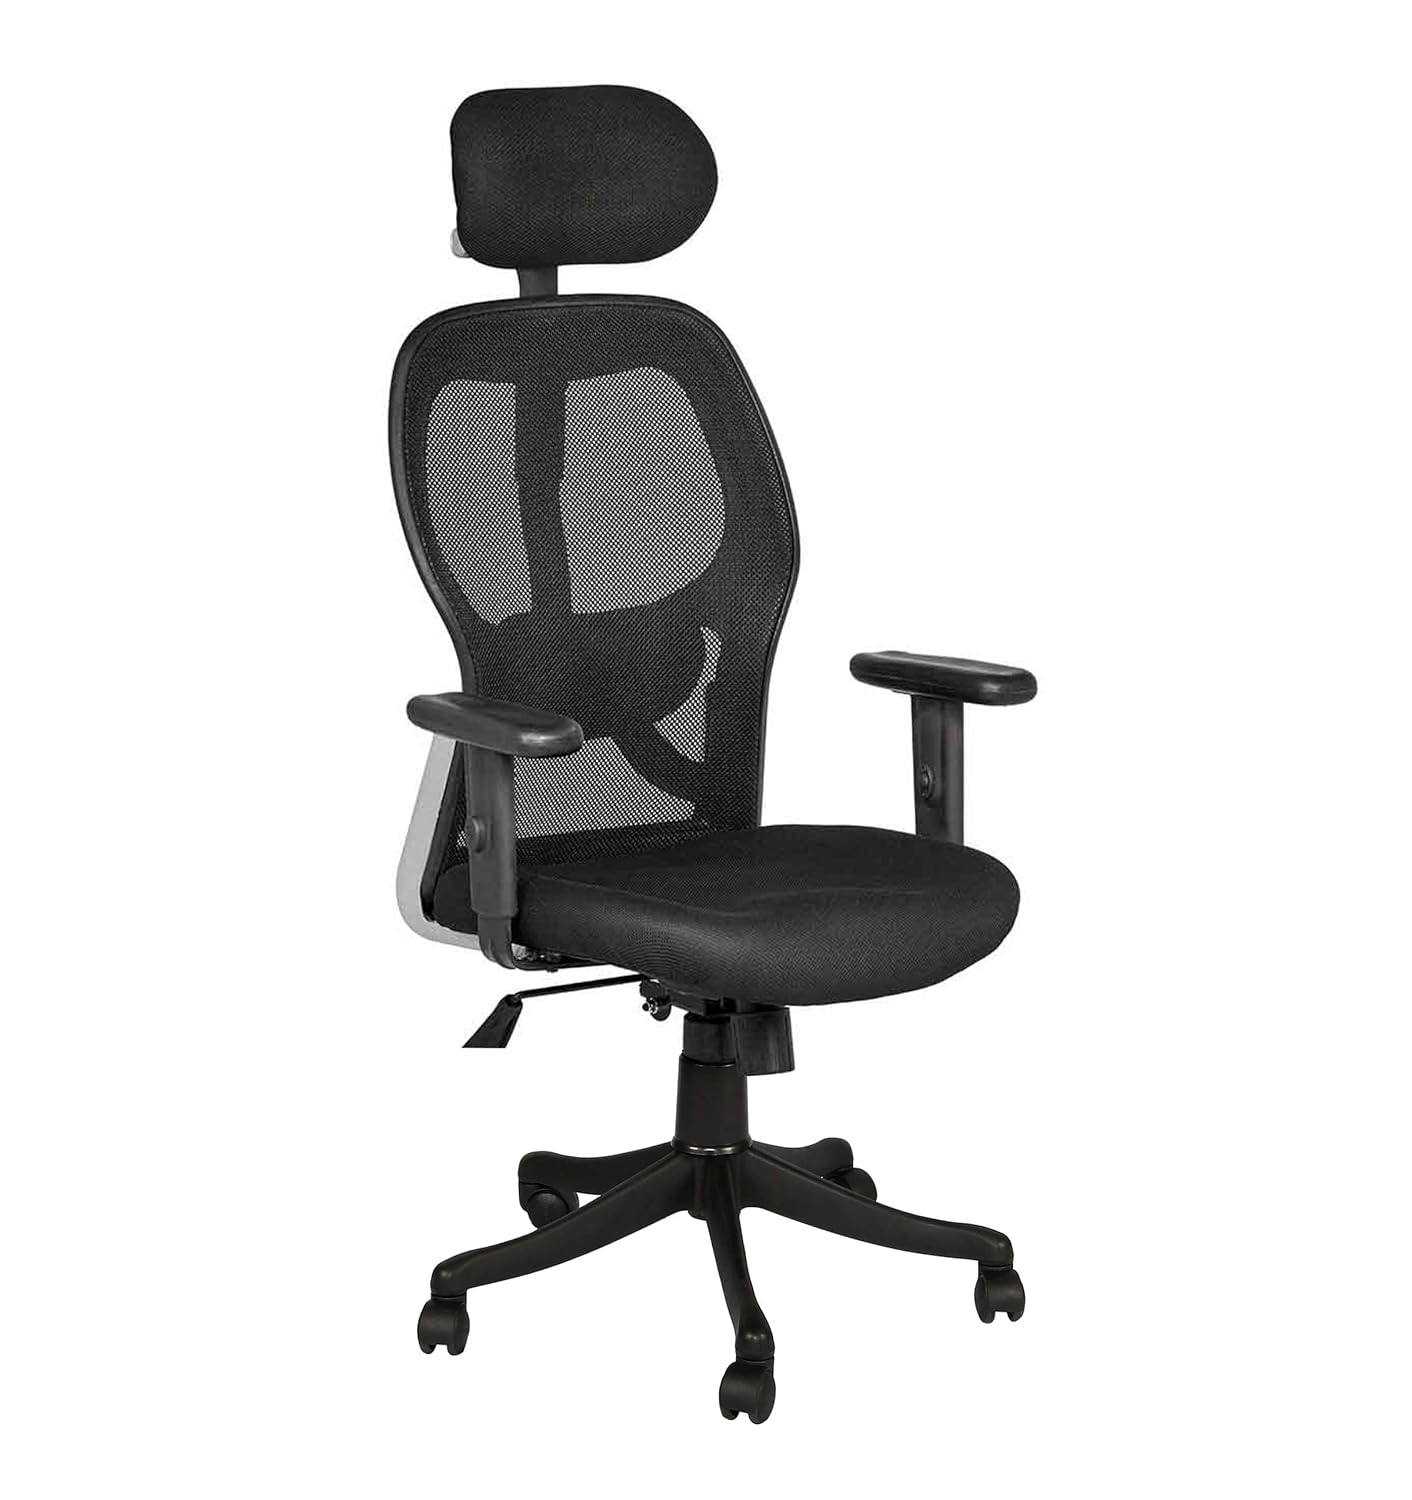 Jazz High Back Executive Office Chair for Desk, Office, Boss, Director with Swivel Function, Multi - Locking Mechanism, Adjustable Headrest, Armrests, Height, and Lumbar Support - Black - Torque India